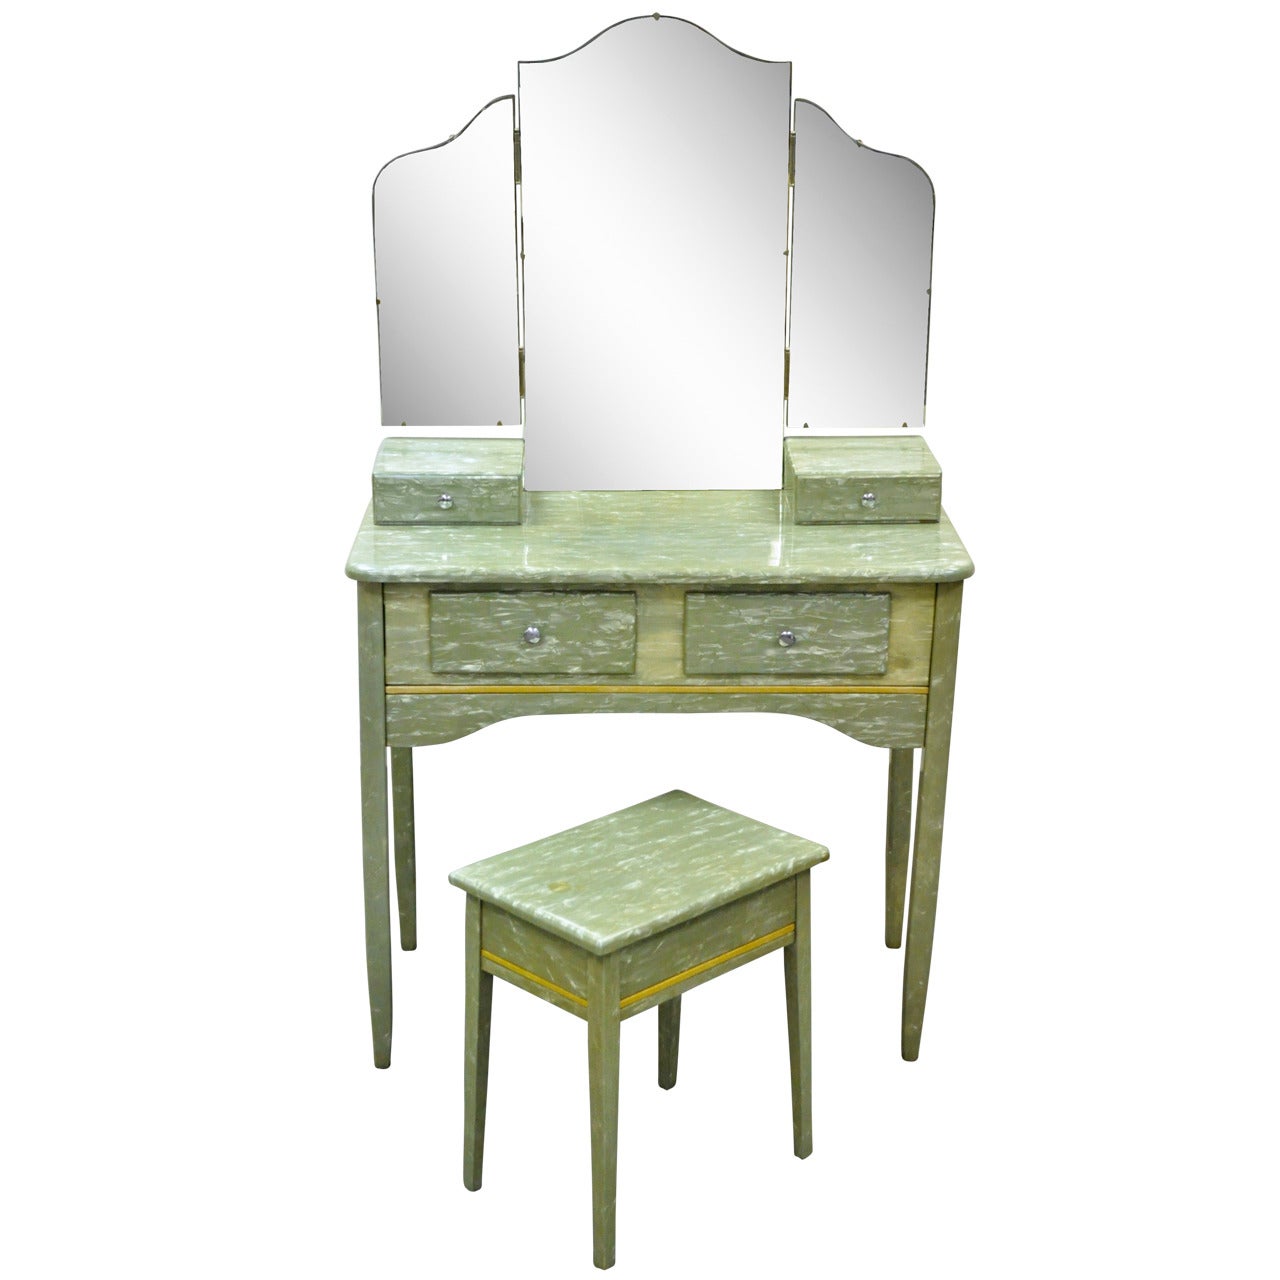 Rare Art Deco Green Celluloid Covered Vanity with Tri Fold Mirror and Bench